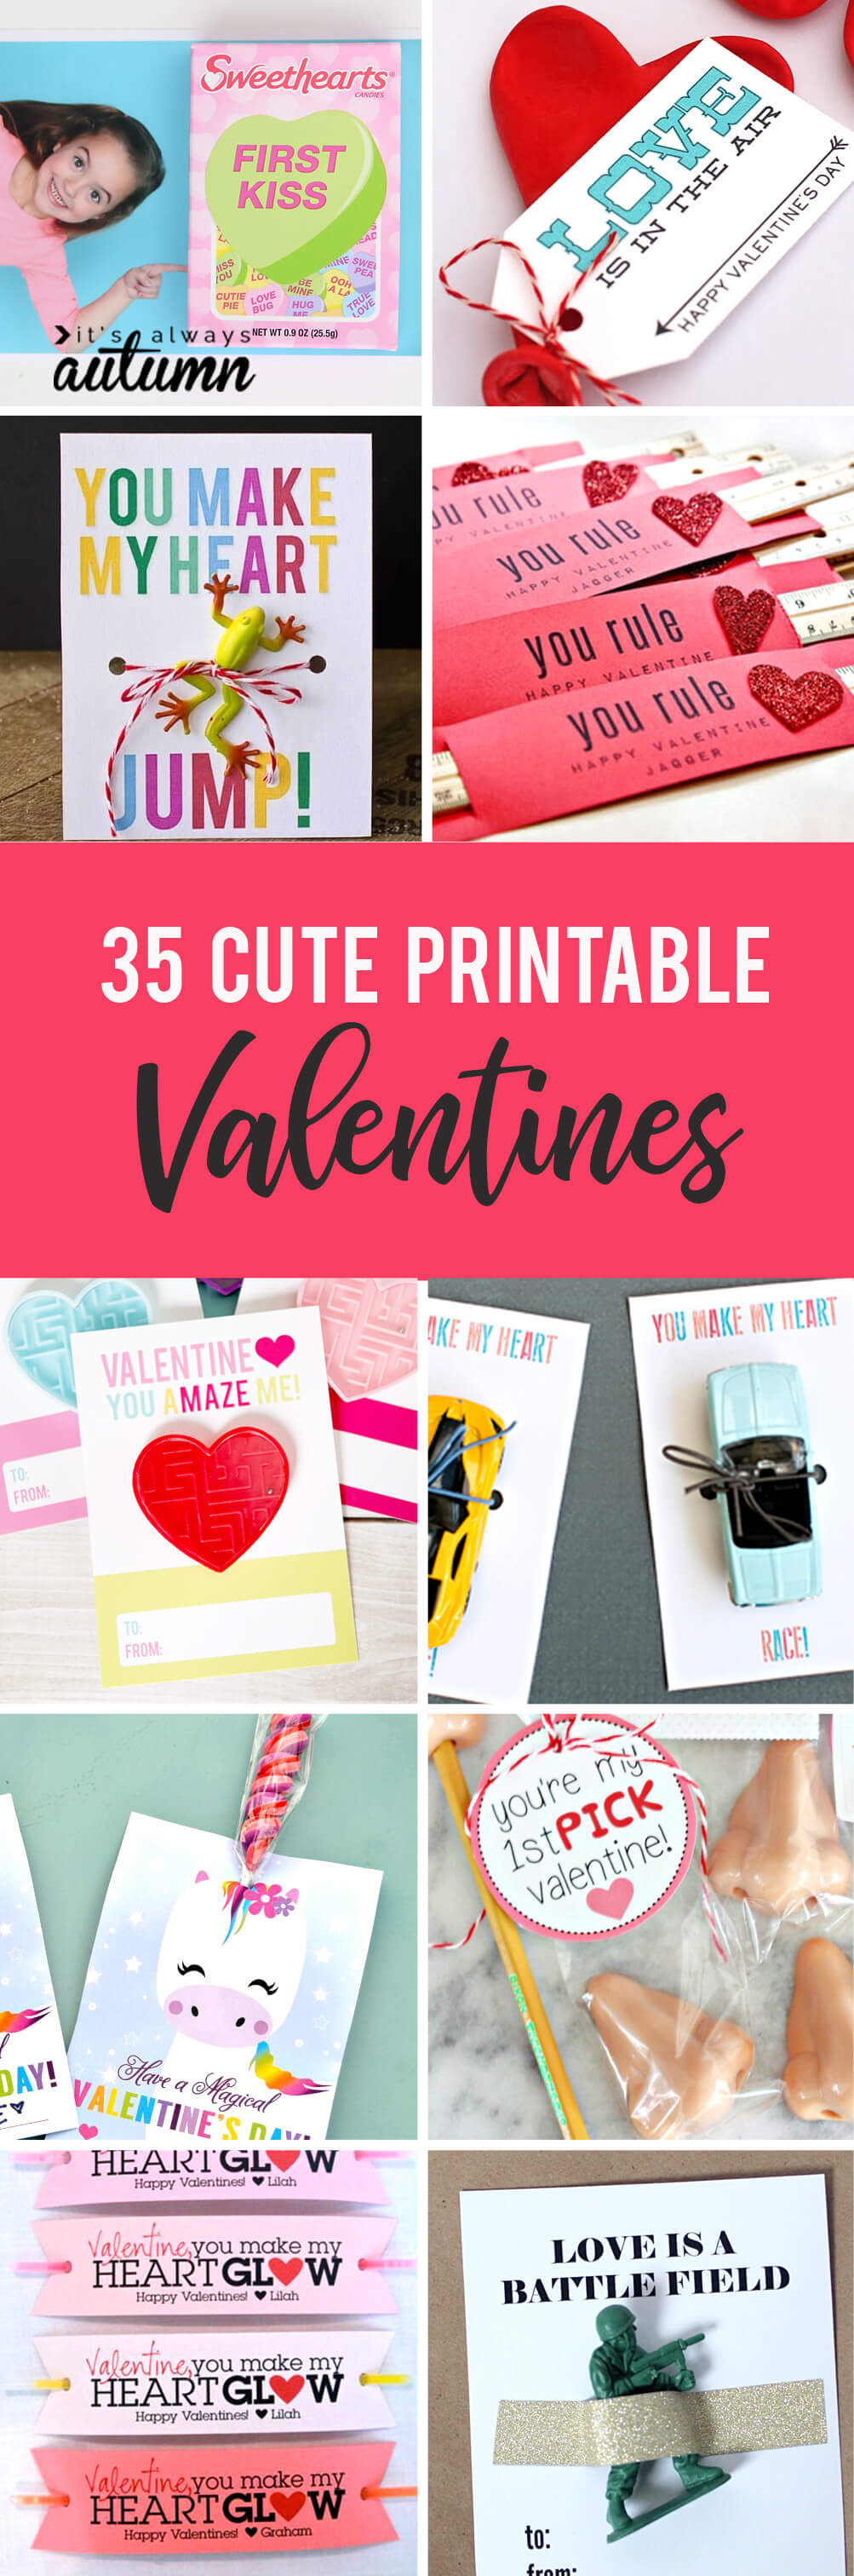 35 Adorable Diy Valentine's Cards To Print At Home For Your Within Valentine Card Template For Kids